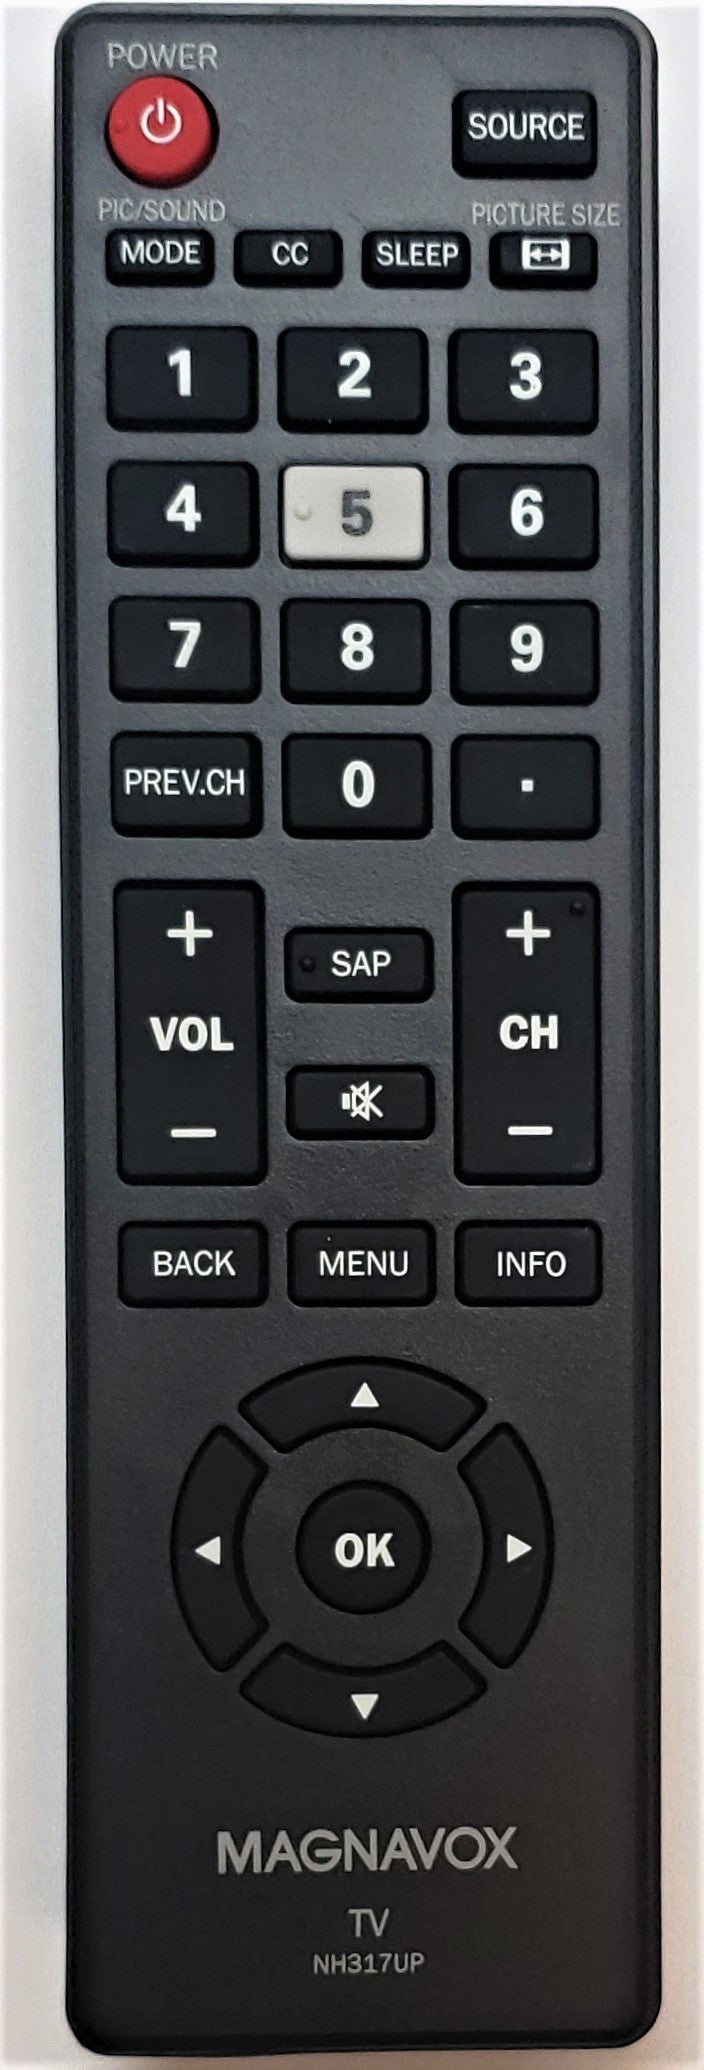 Original OEM replacement remote control for Magnavox LED/LCD TV NH317UP